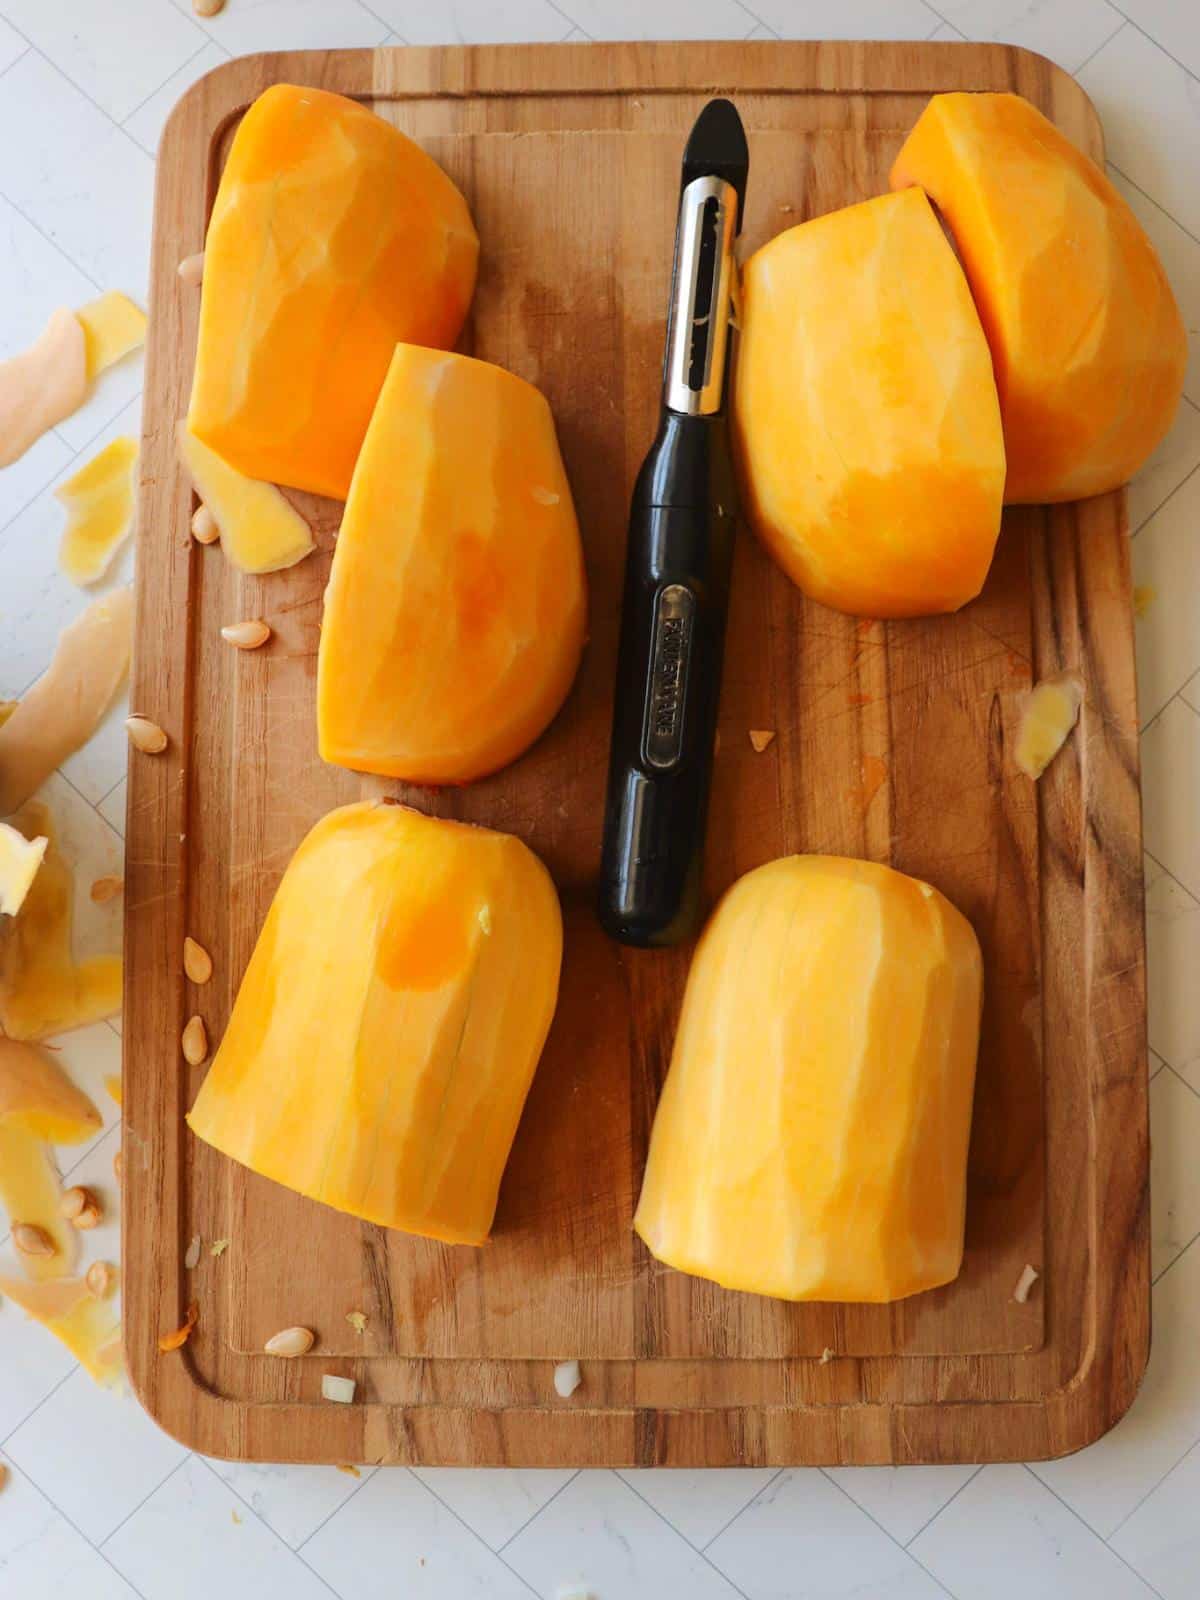 Butternut squash pieces getting peeled on a wooden cutting board.